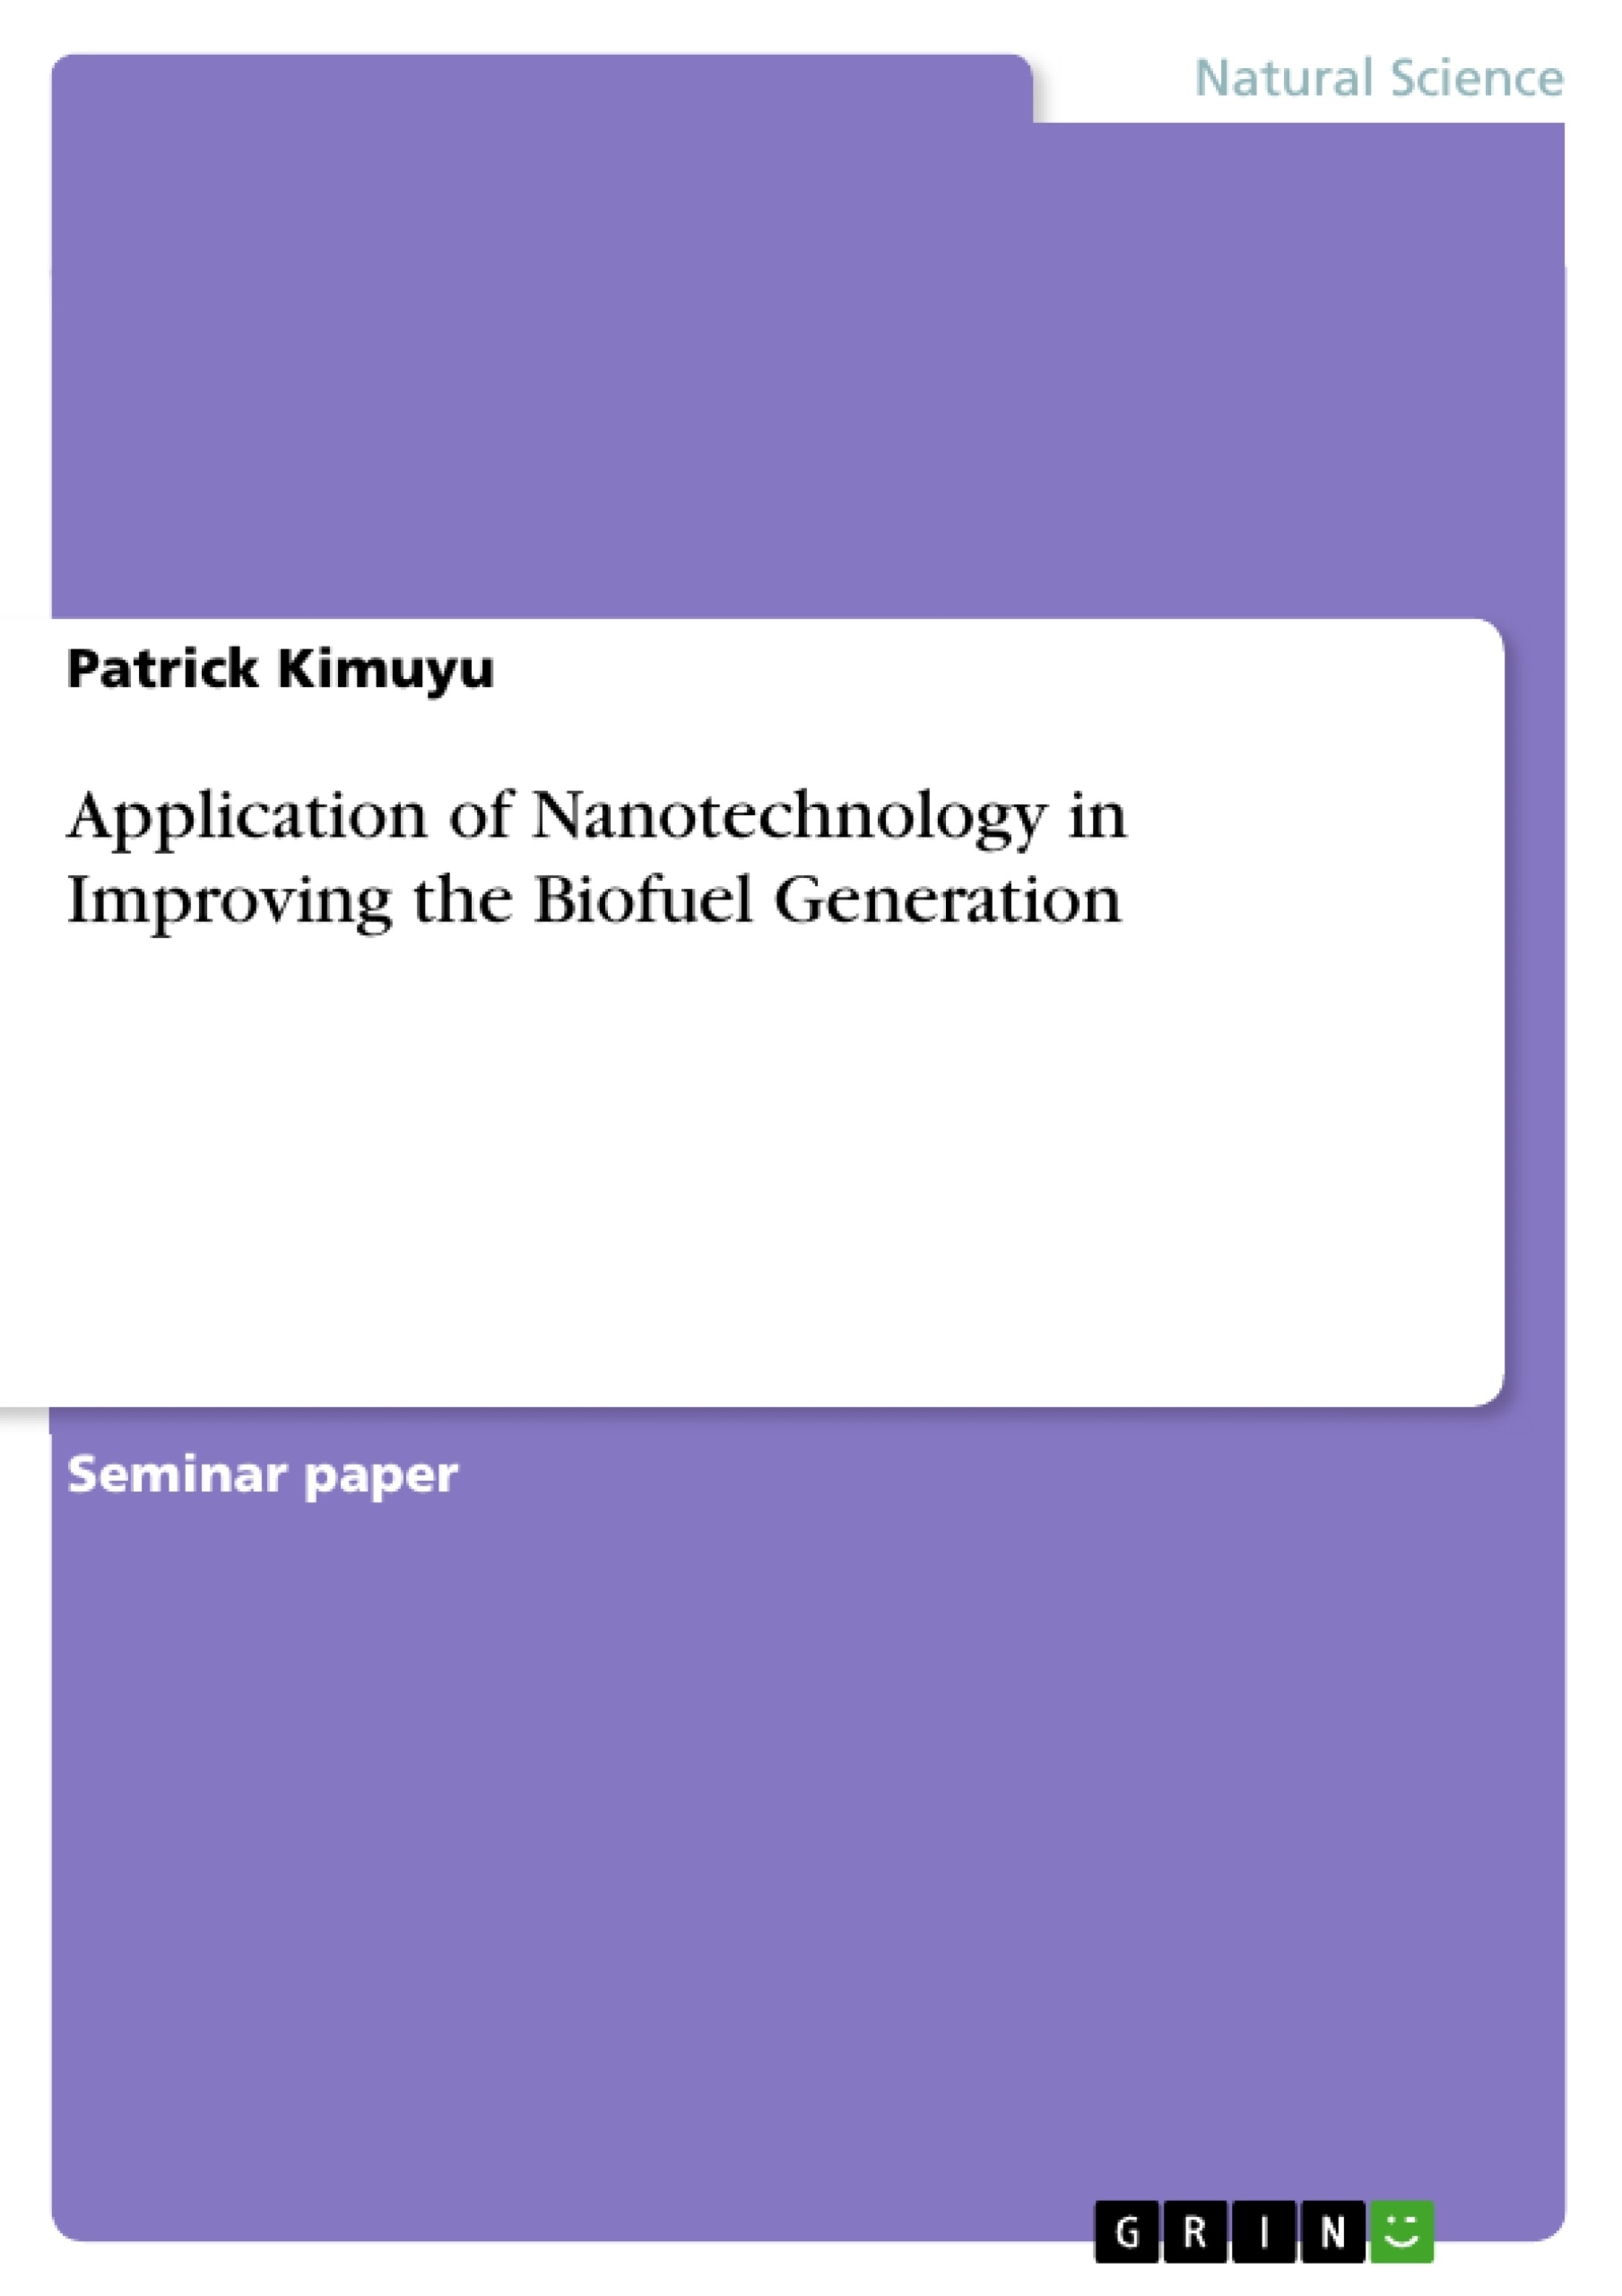 Title: Application of Nanotechnology in Improving the Biofuel Generation